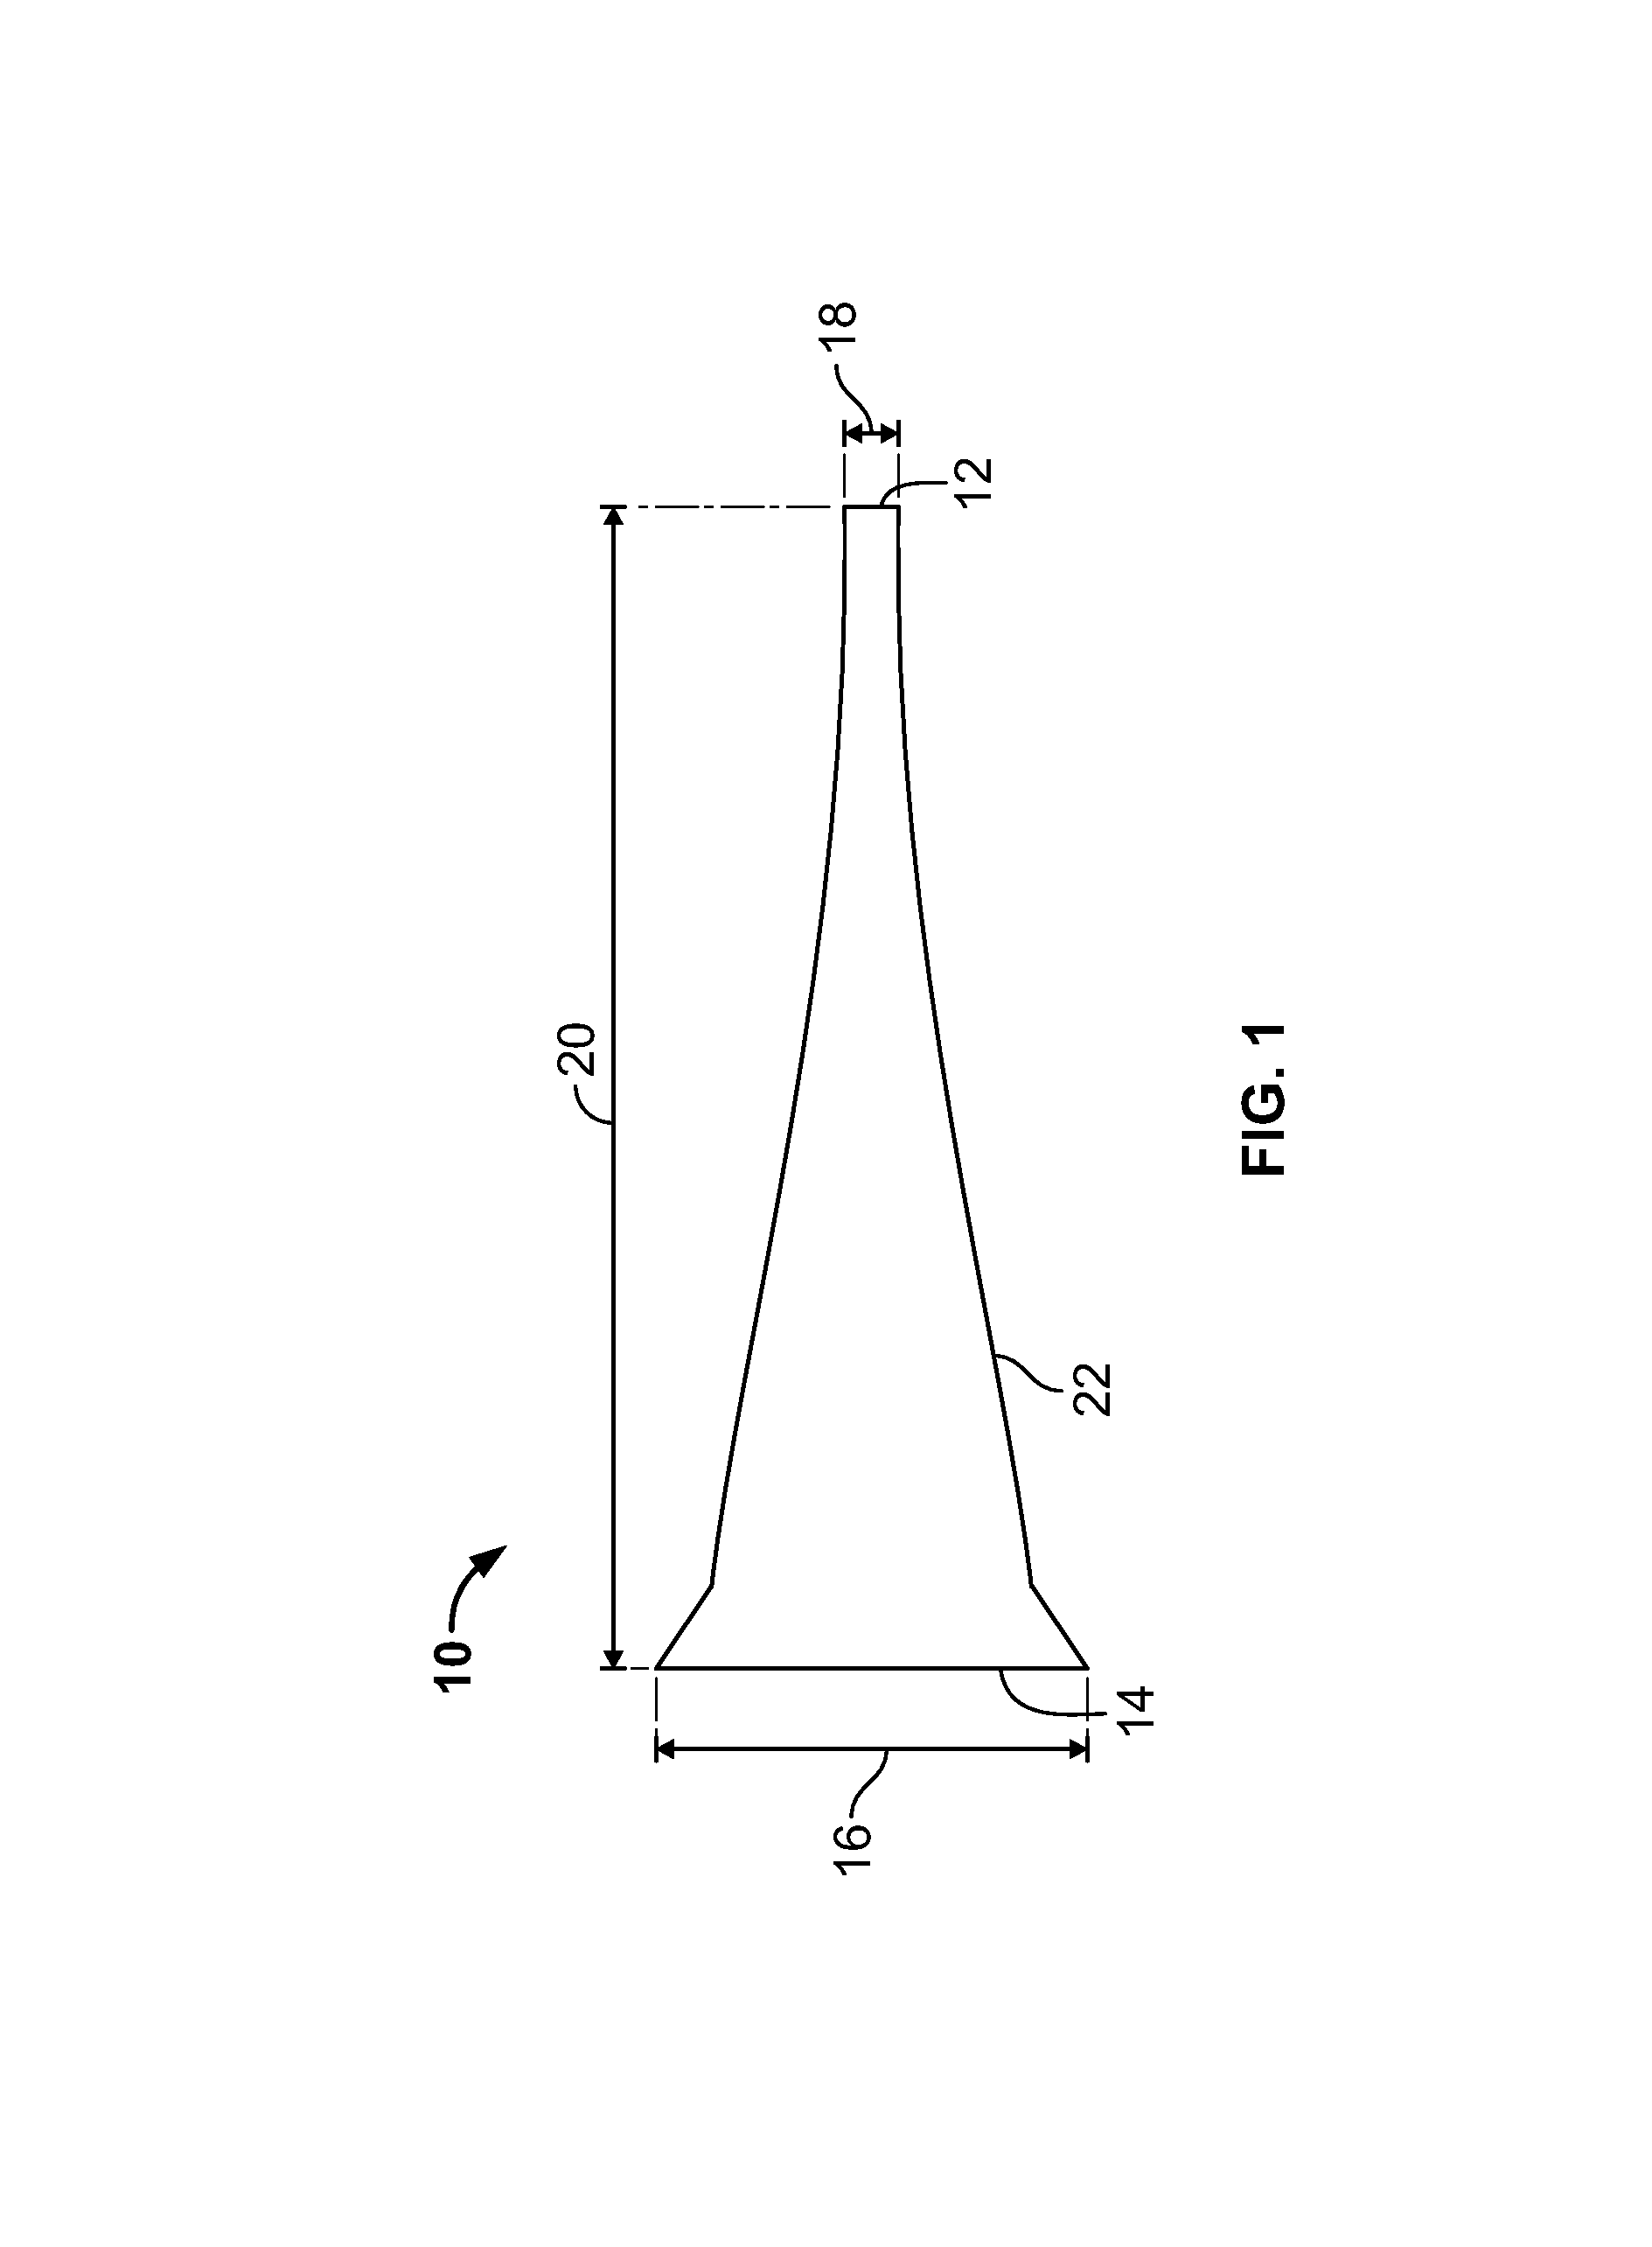 Compact broad-band admittance tunnel incorporating gaussian beam antennas